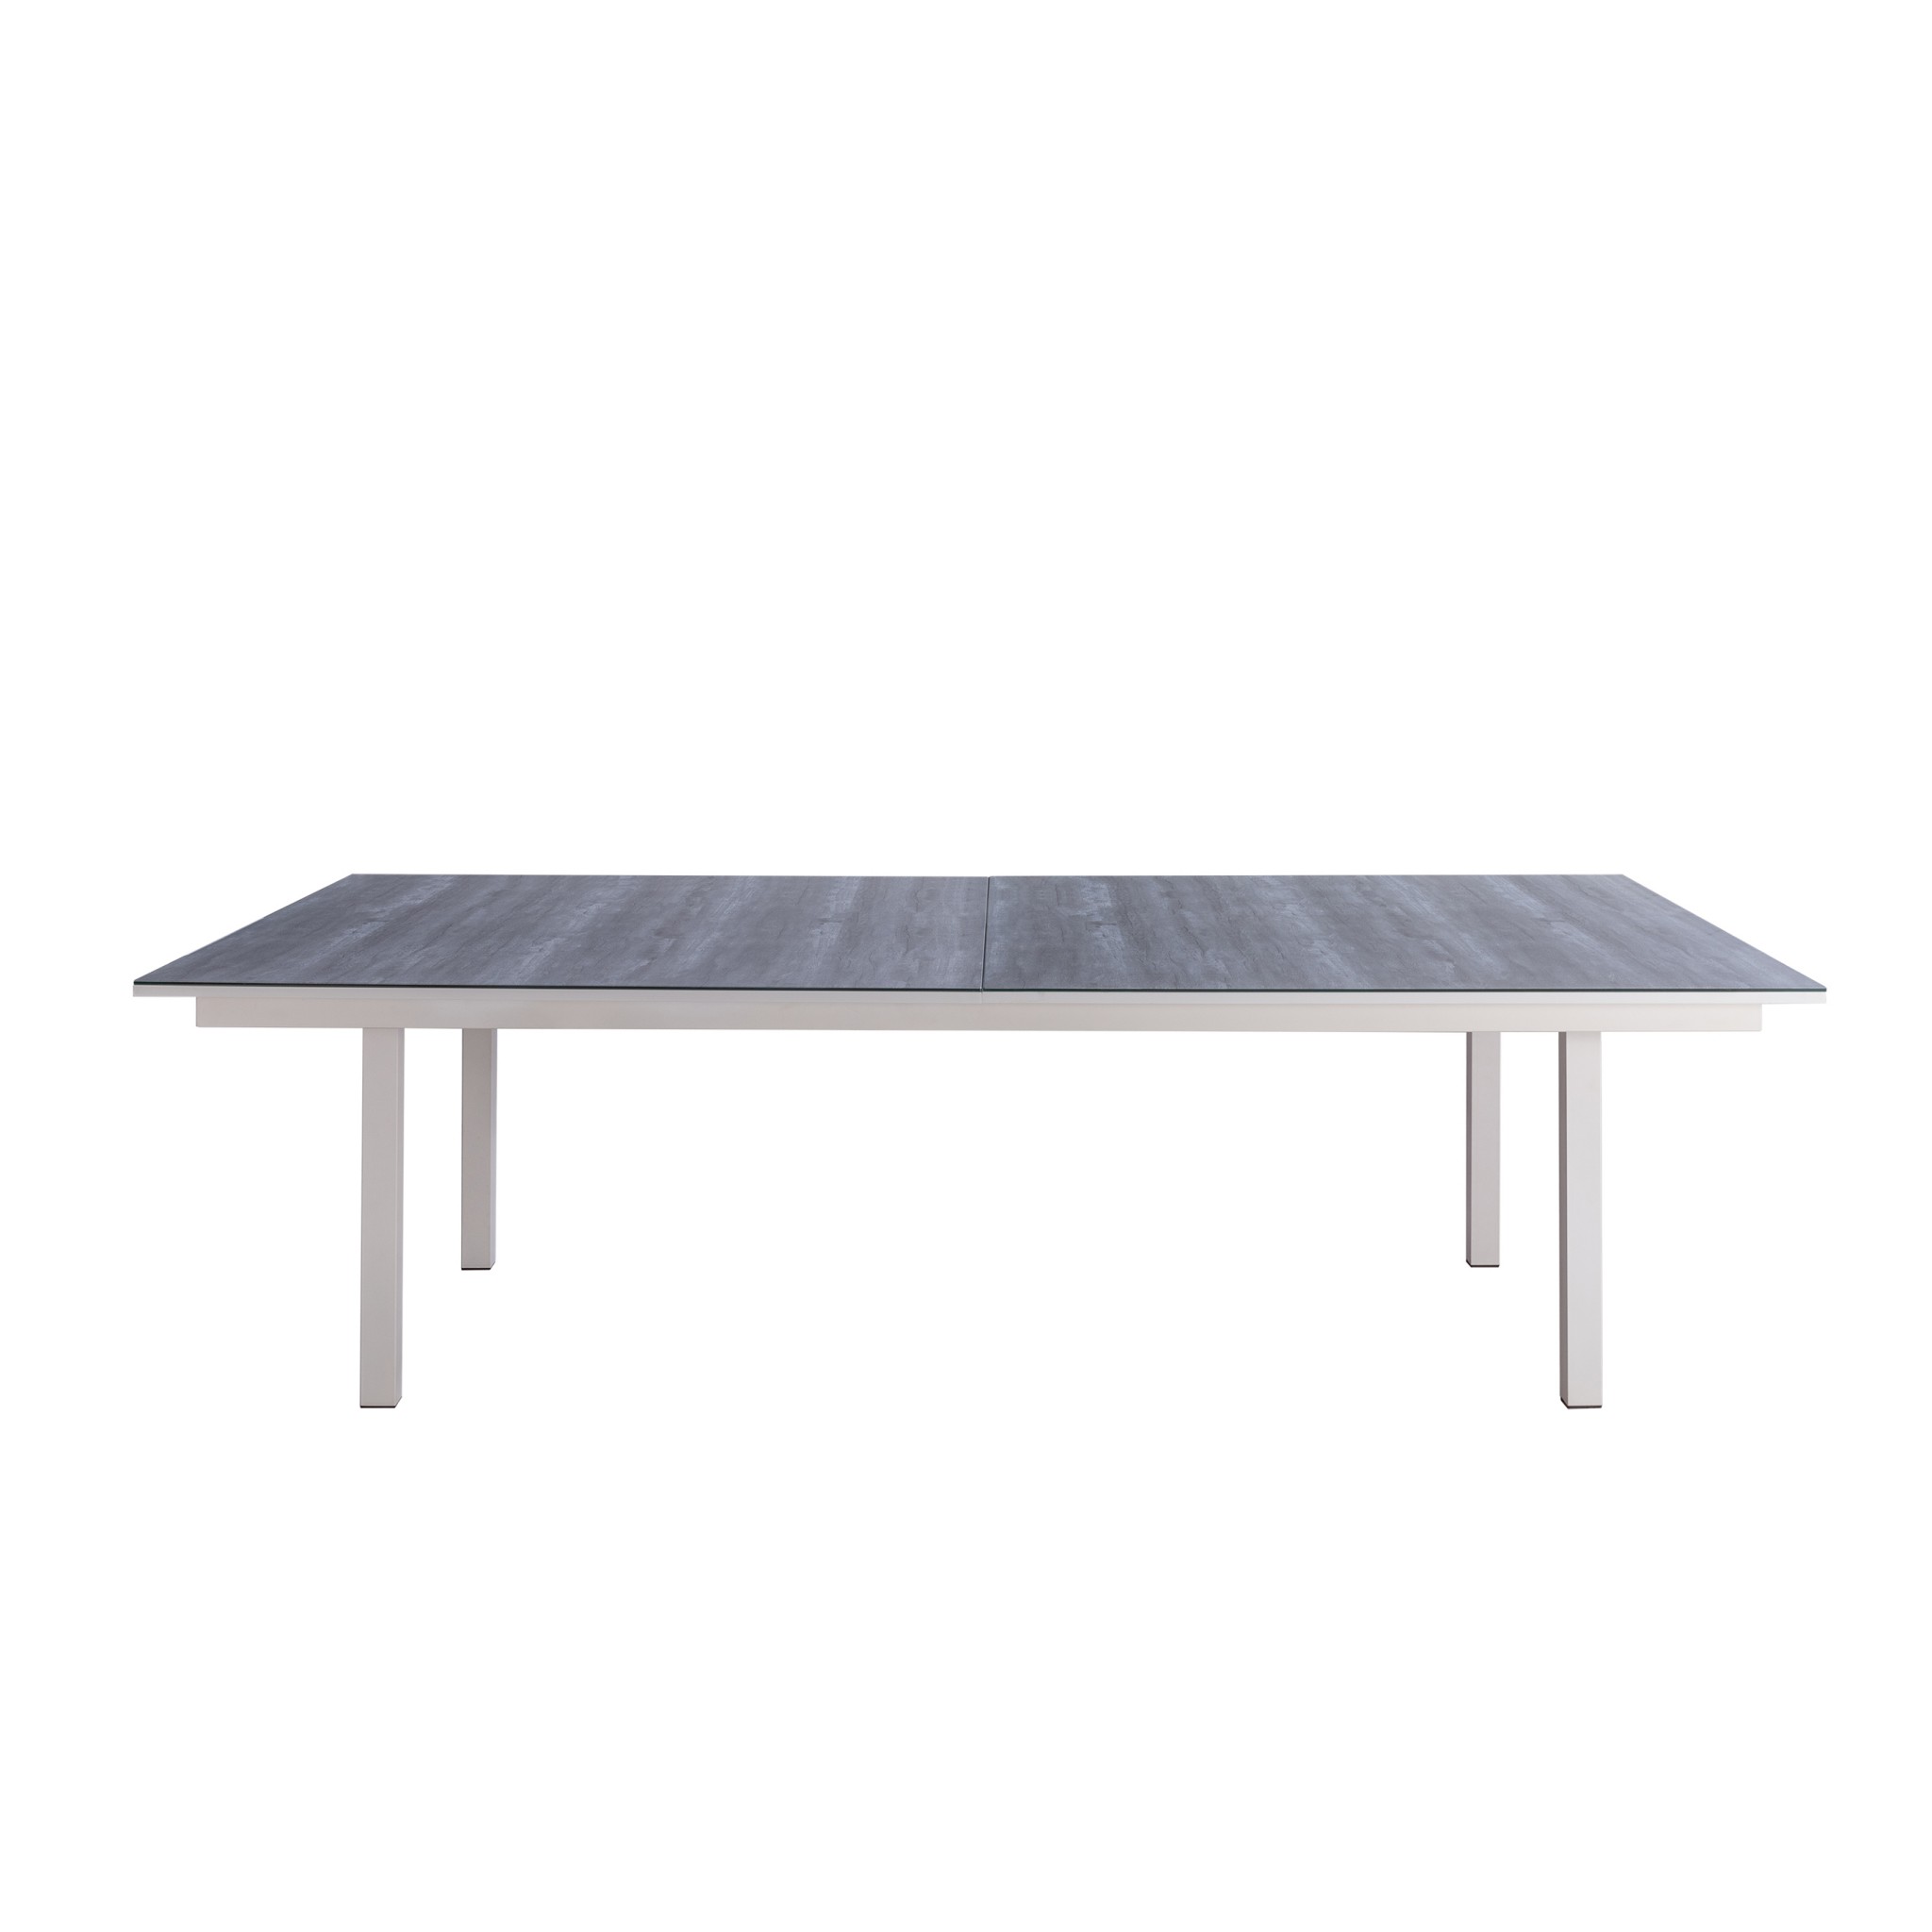 108" X 60" X 30" Light Gray Ceramic Dining and Table Tennis